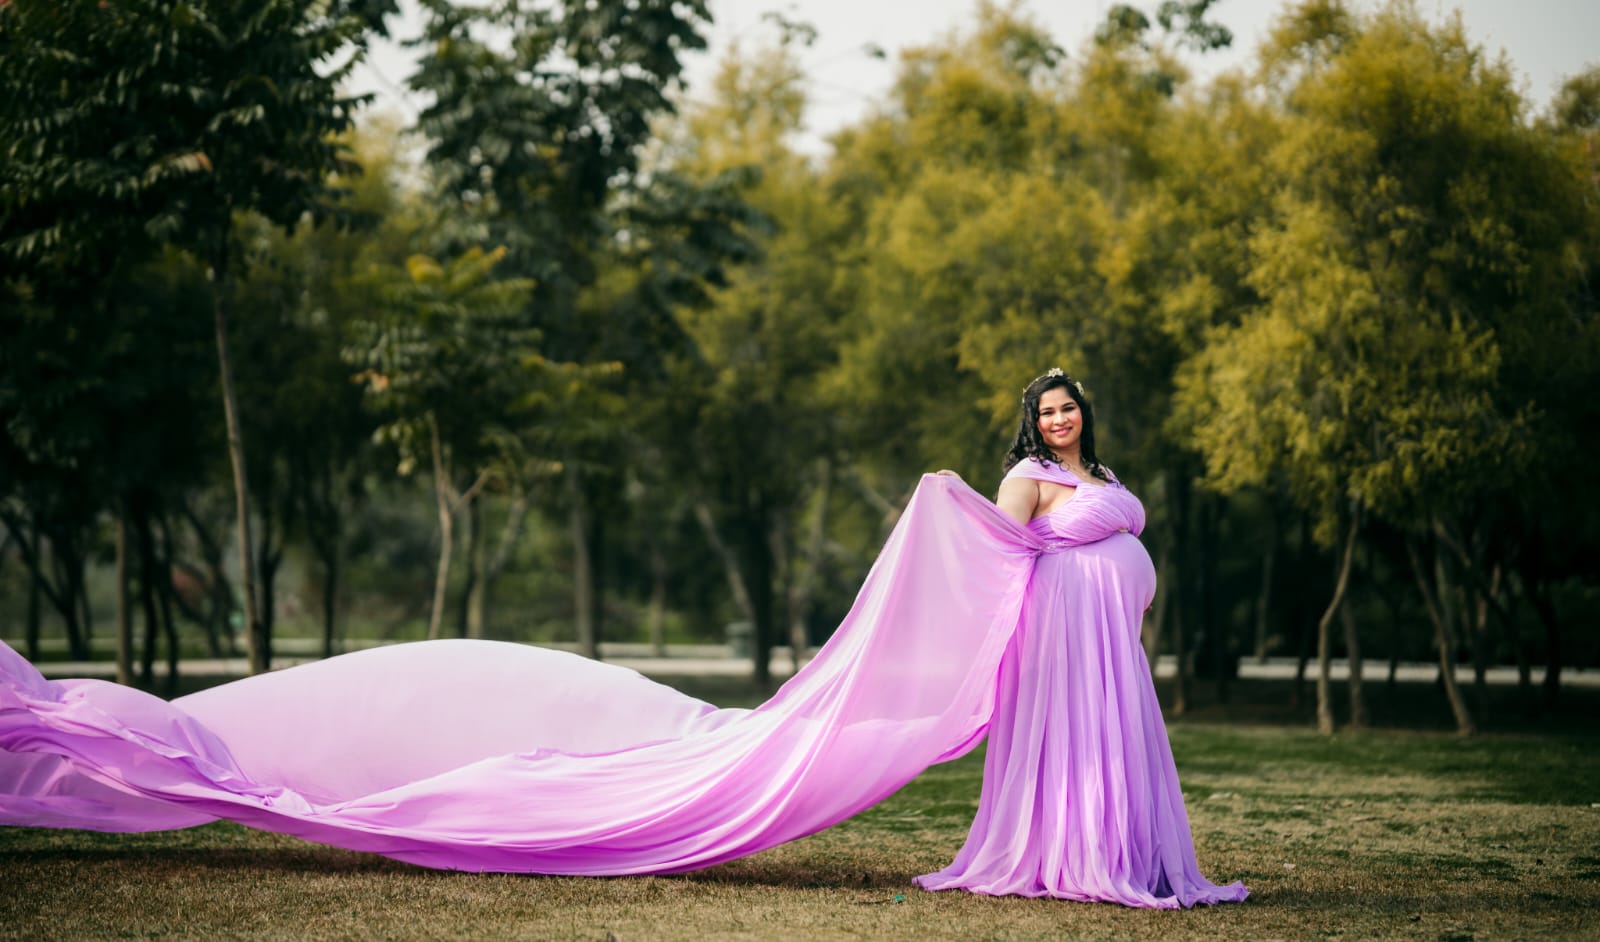 Pregnancy Gowns at Best Price on Rent